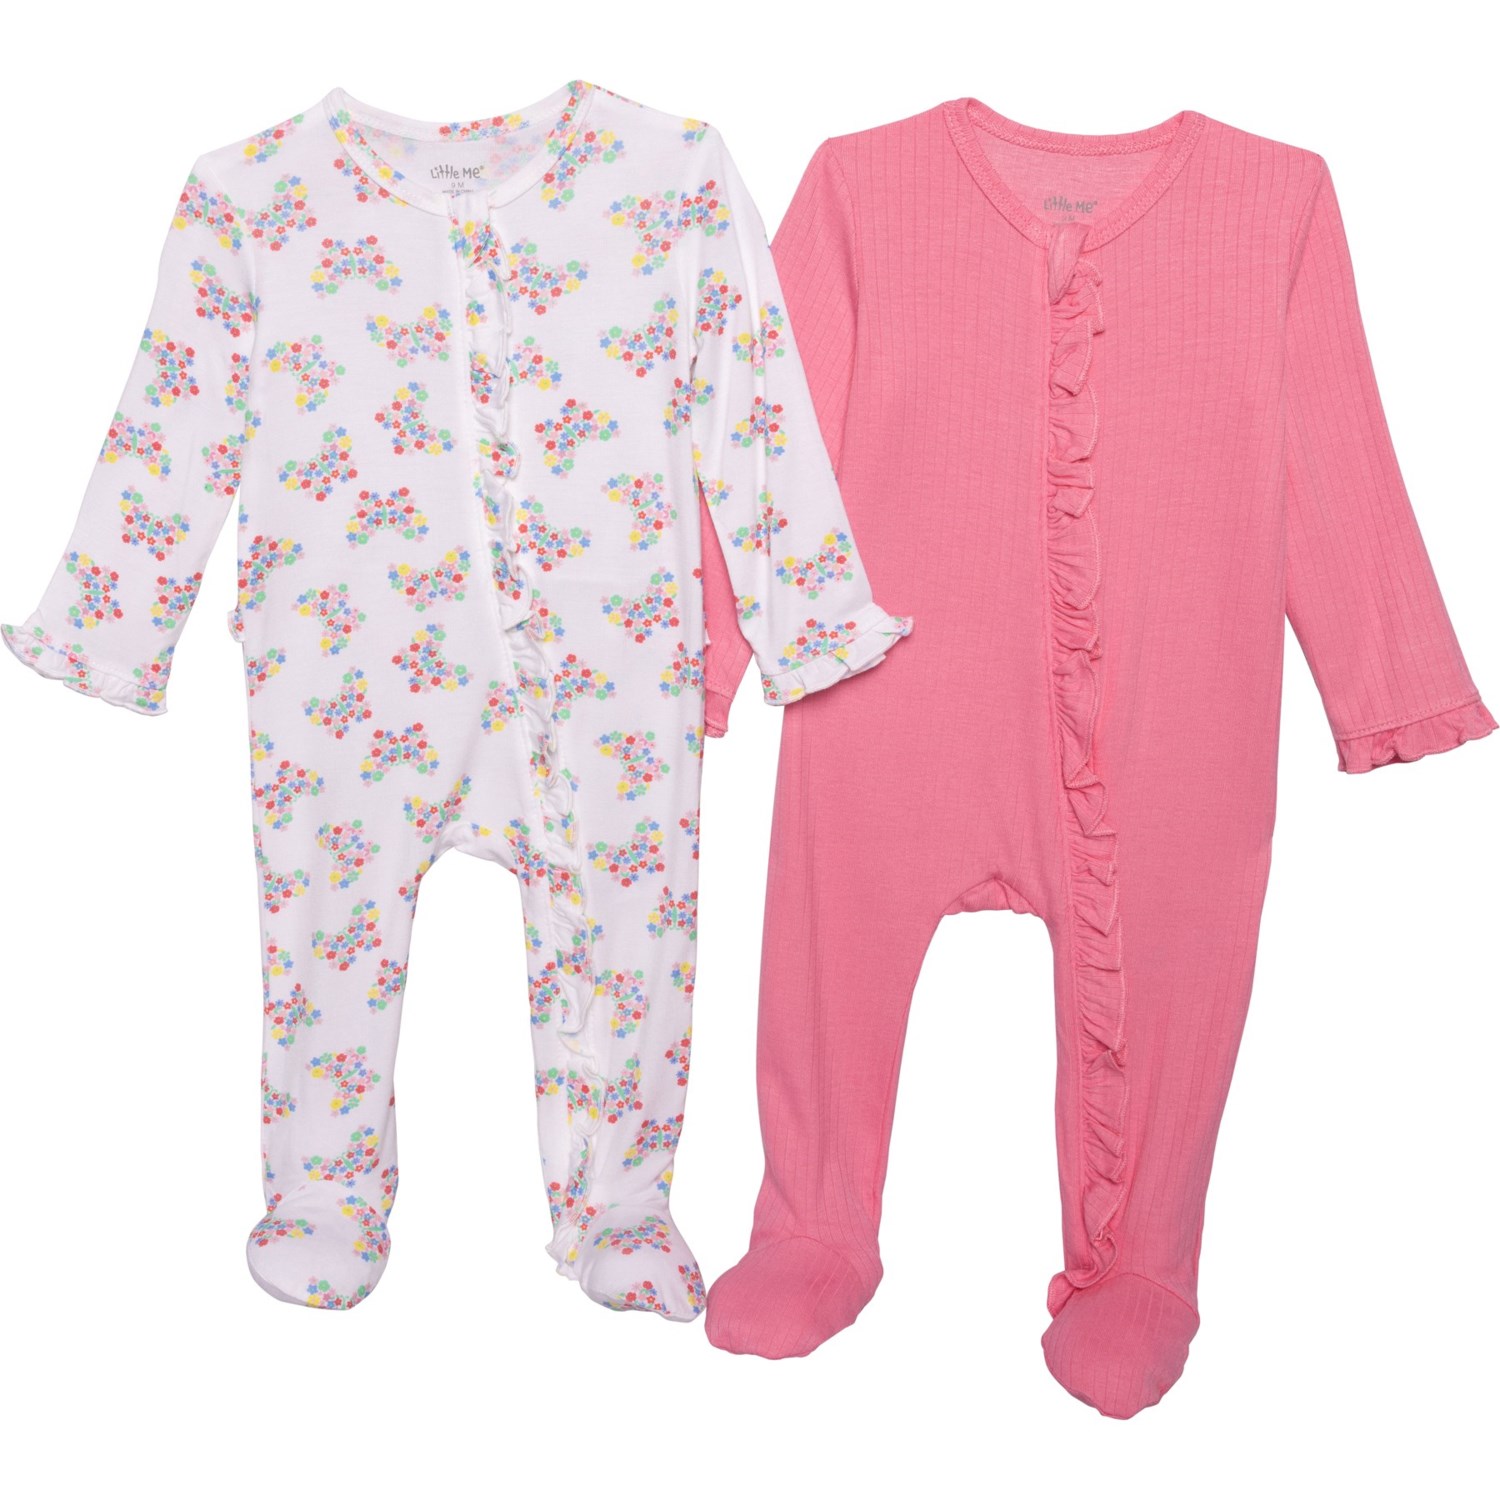 () g ~[ Ct@g K[Y X[p[\tg o^tC tbeB[ pW} - 2-pbN, O X[u LITTLE ME Infant Girls Supersoft Butterfly Footie Pajamas - 2-Pack, Long Sleeve Butterfly